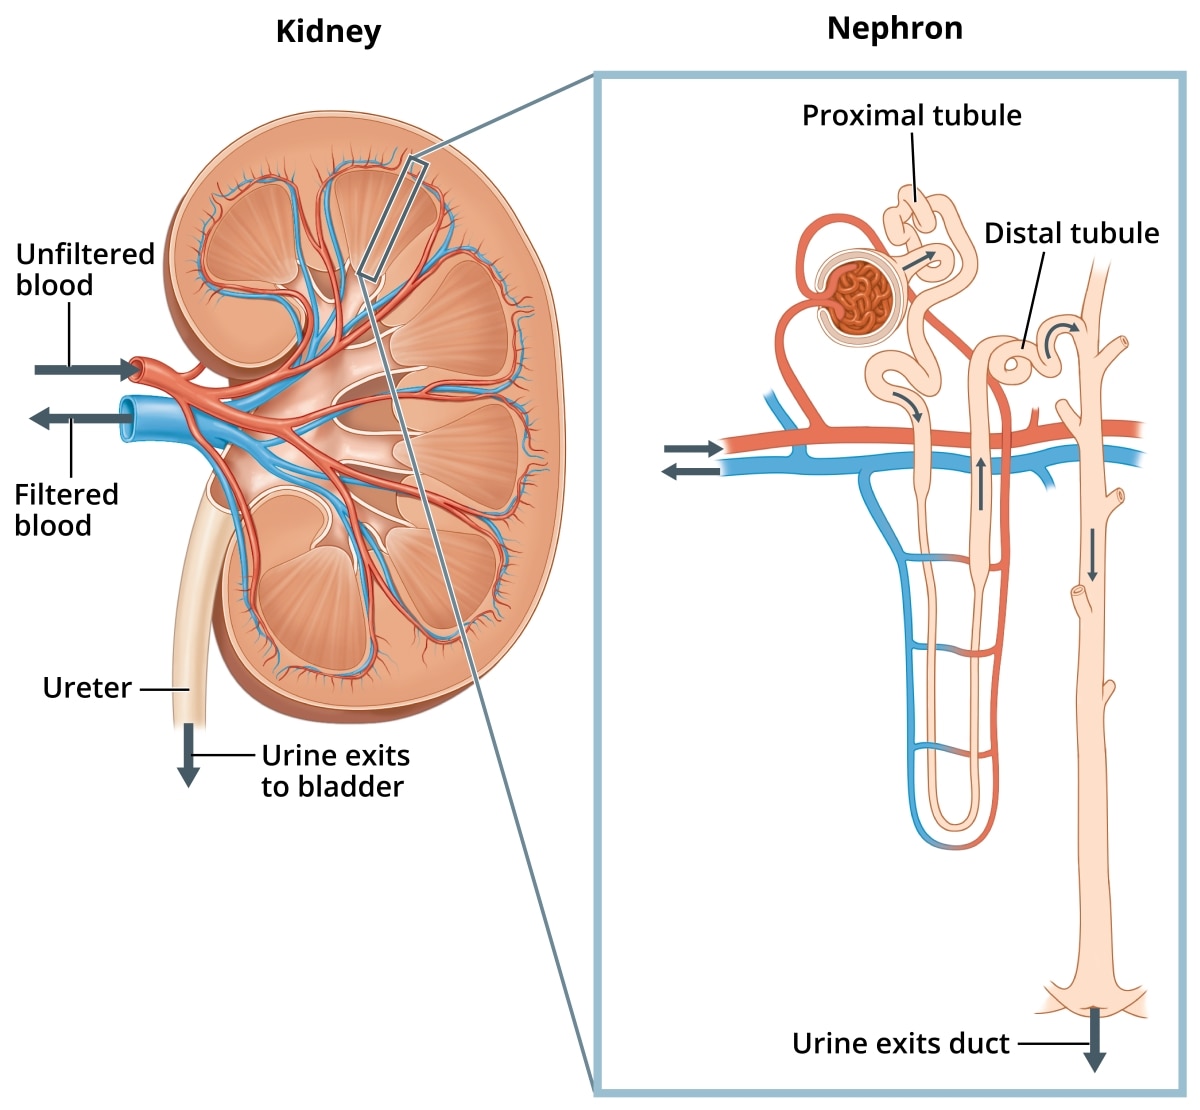 Two illustrations. A human kidney, with arrows showing where unfiltered blood enters the kidney and filtered blood leaves the kidney. Wastes and extra water leave the kidney through the ureter to the bladder as urine. An inset image of the nephron shows the location of the proximal tubule, distal tubule, and the duct through which urine leaves the nephron.